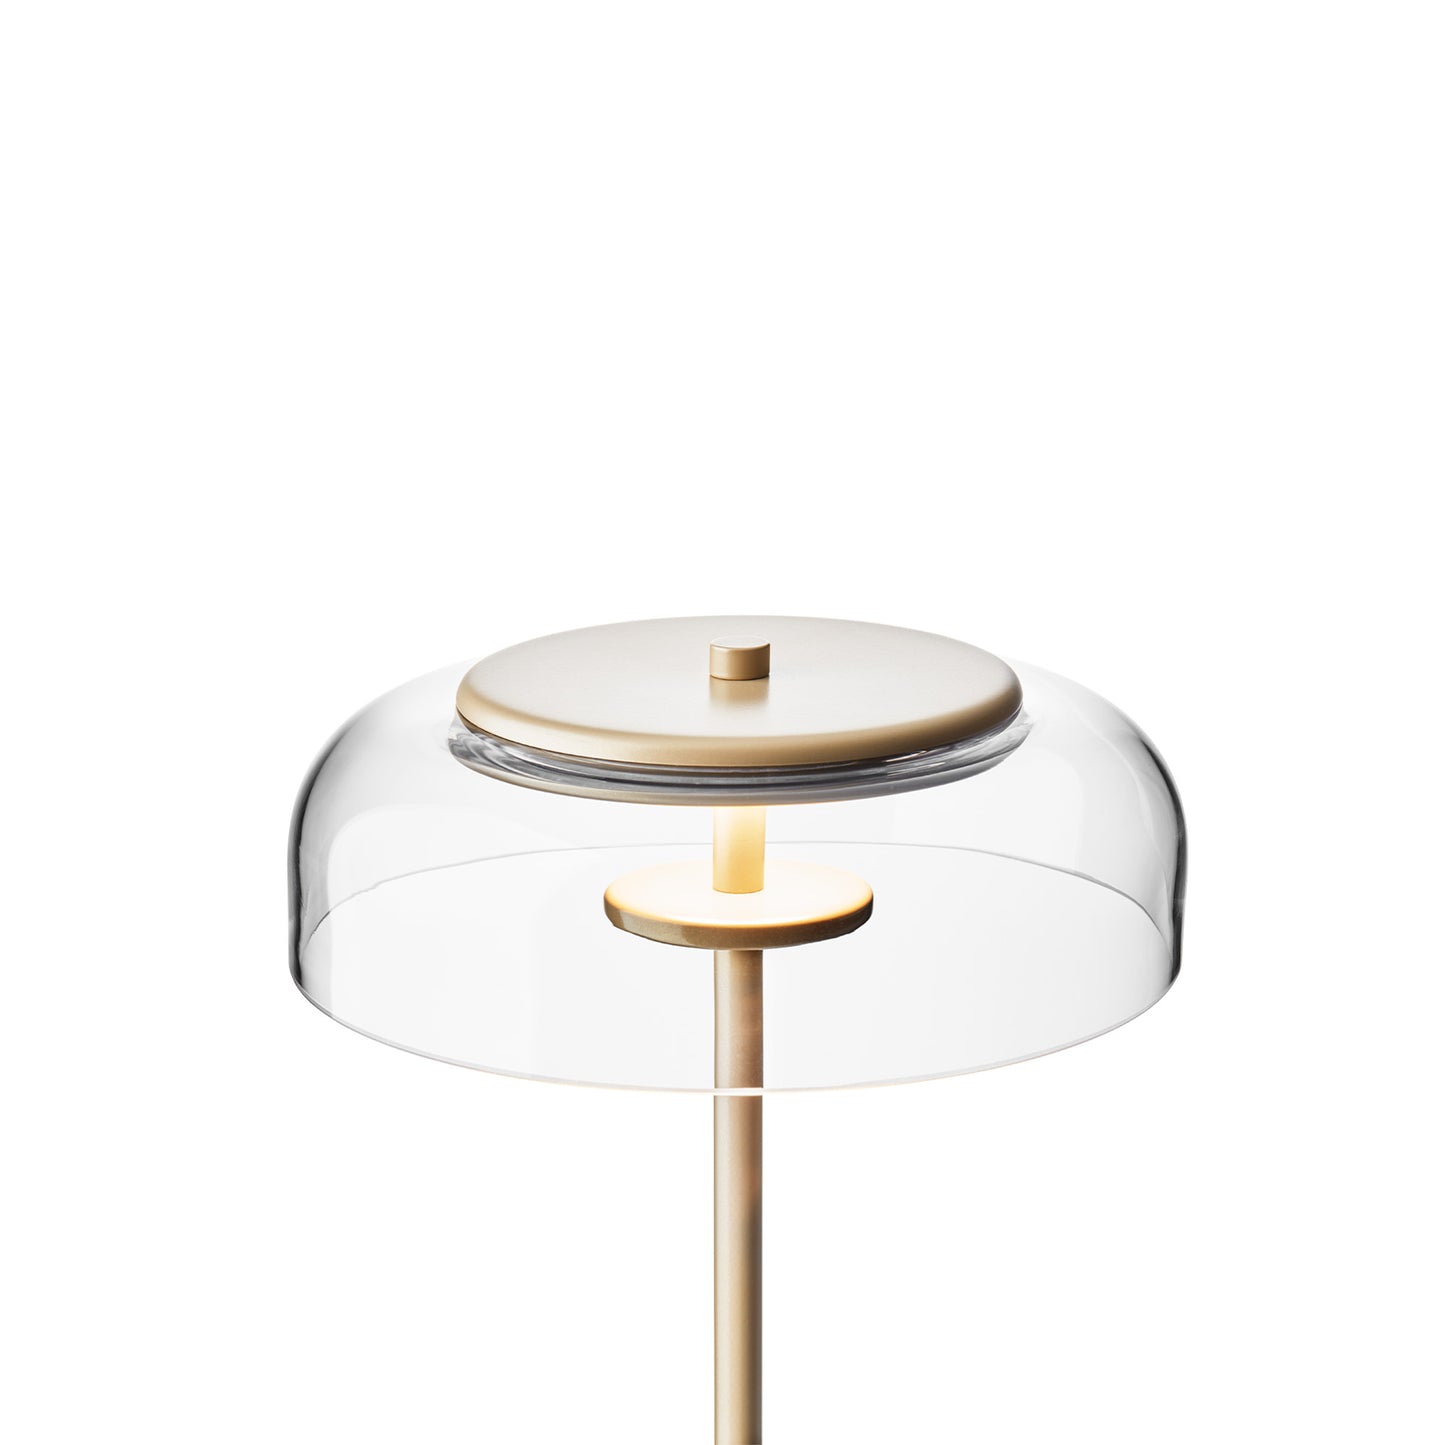 NUURA Blossi Table - Nordic Gold with Clear Glass Shade - Twenty Five Percent Discount